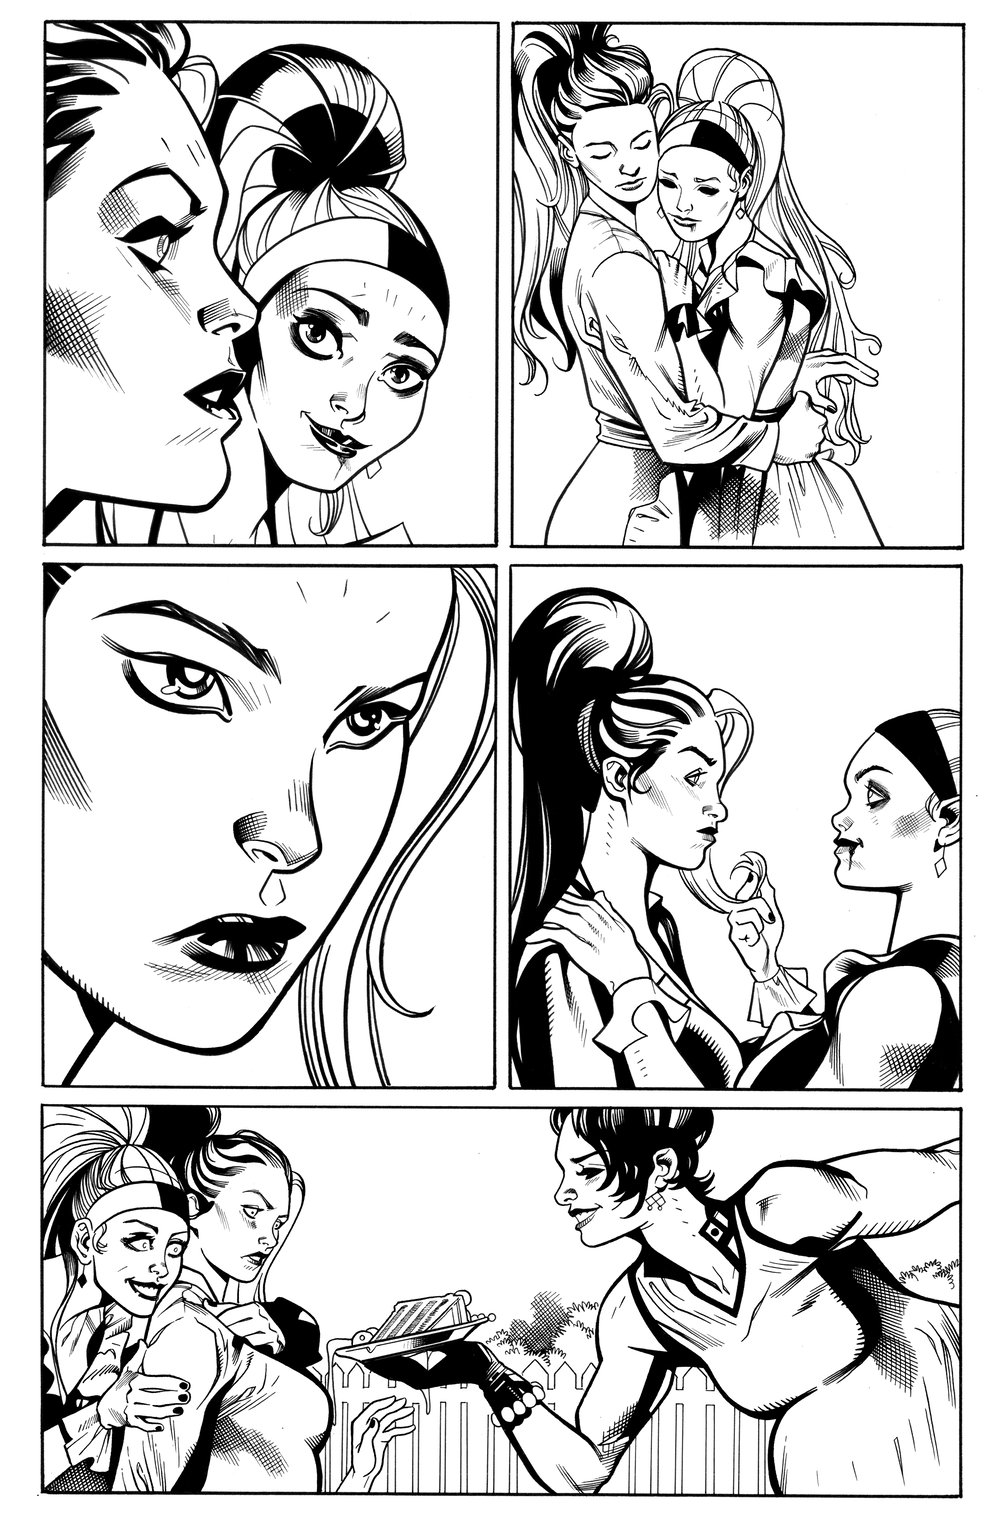 Image of Knight Terrors: Poison Ivy #1 PG 10